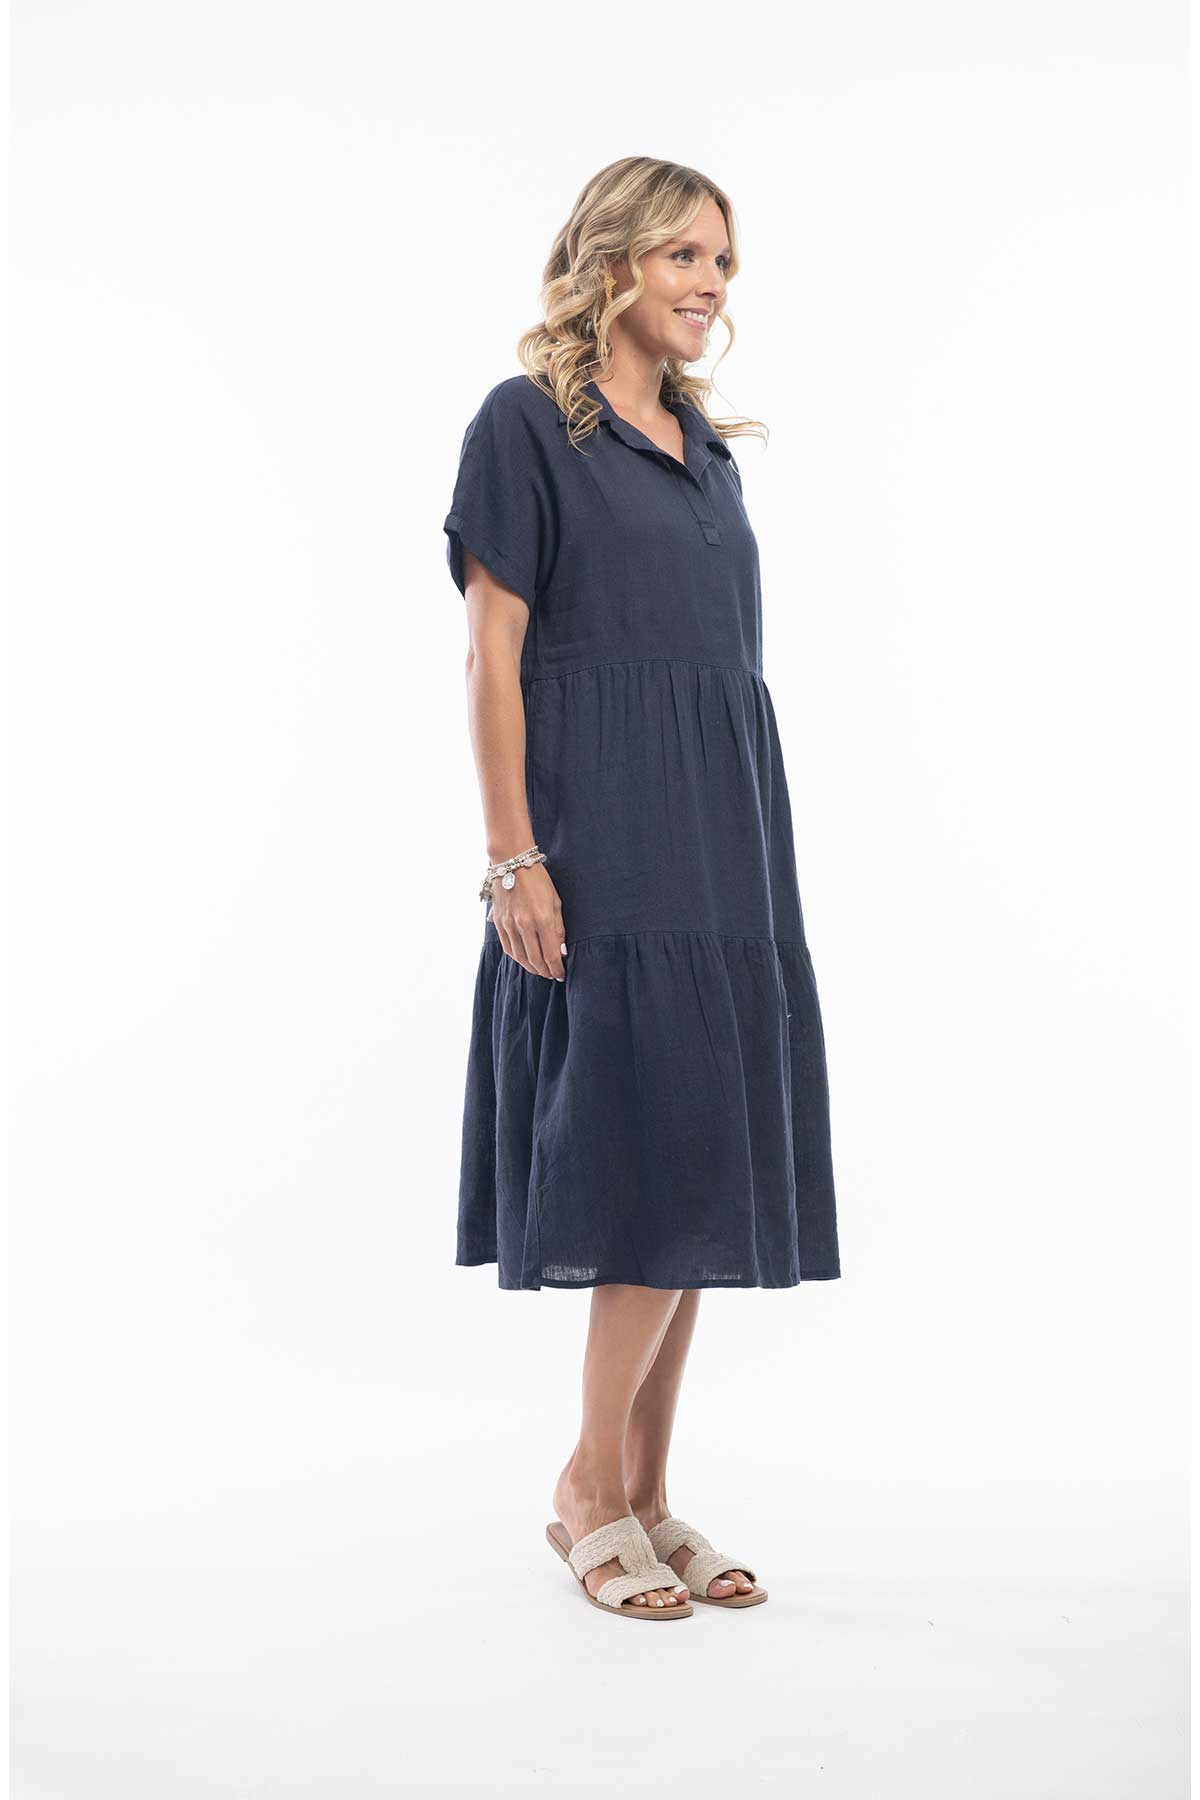 Orientique Dress - Solid Pure Linen Dress Collar Midi Layers side view in navy